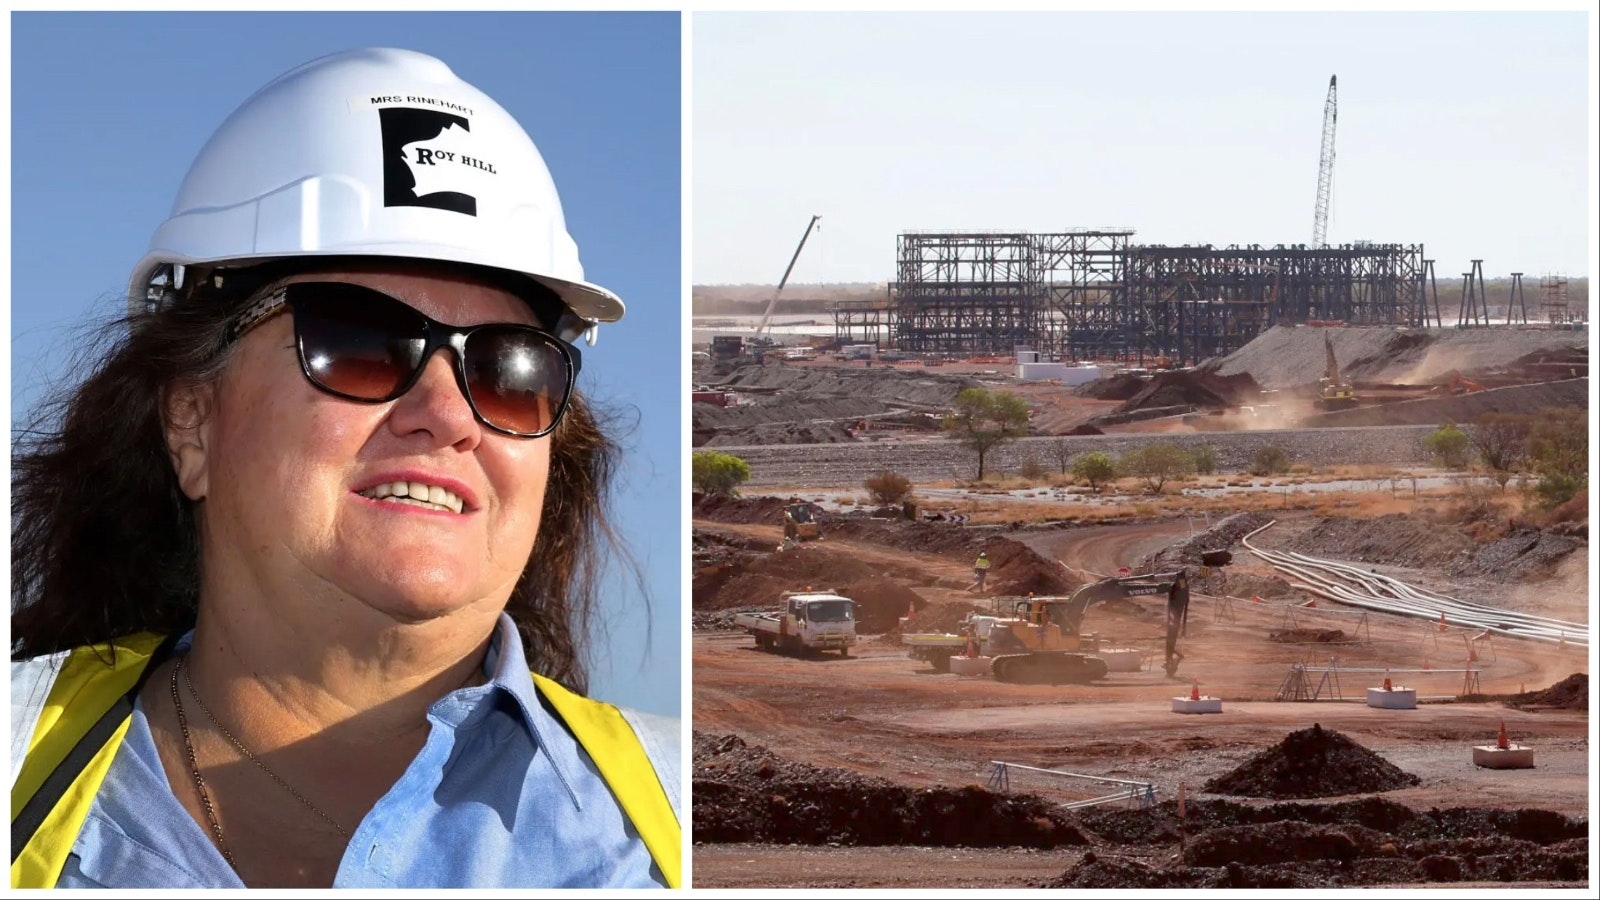 Gina Rinehart, the Austrailian billionaire behind Hancock Prospecting Pty Ltd is branching out to acquire minority stakes in rare earth mining, making some believe she may be working to consolidate the rare earths industry. At right is Hancock's Roy Hill Mine in western Australia.